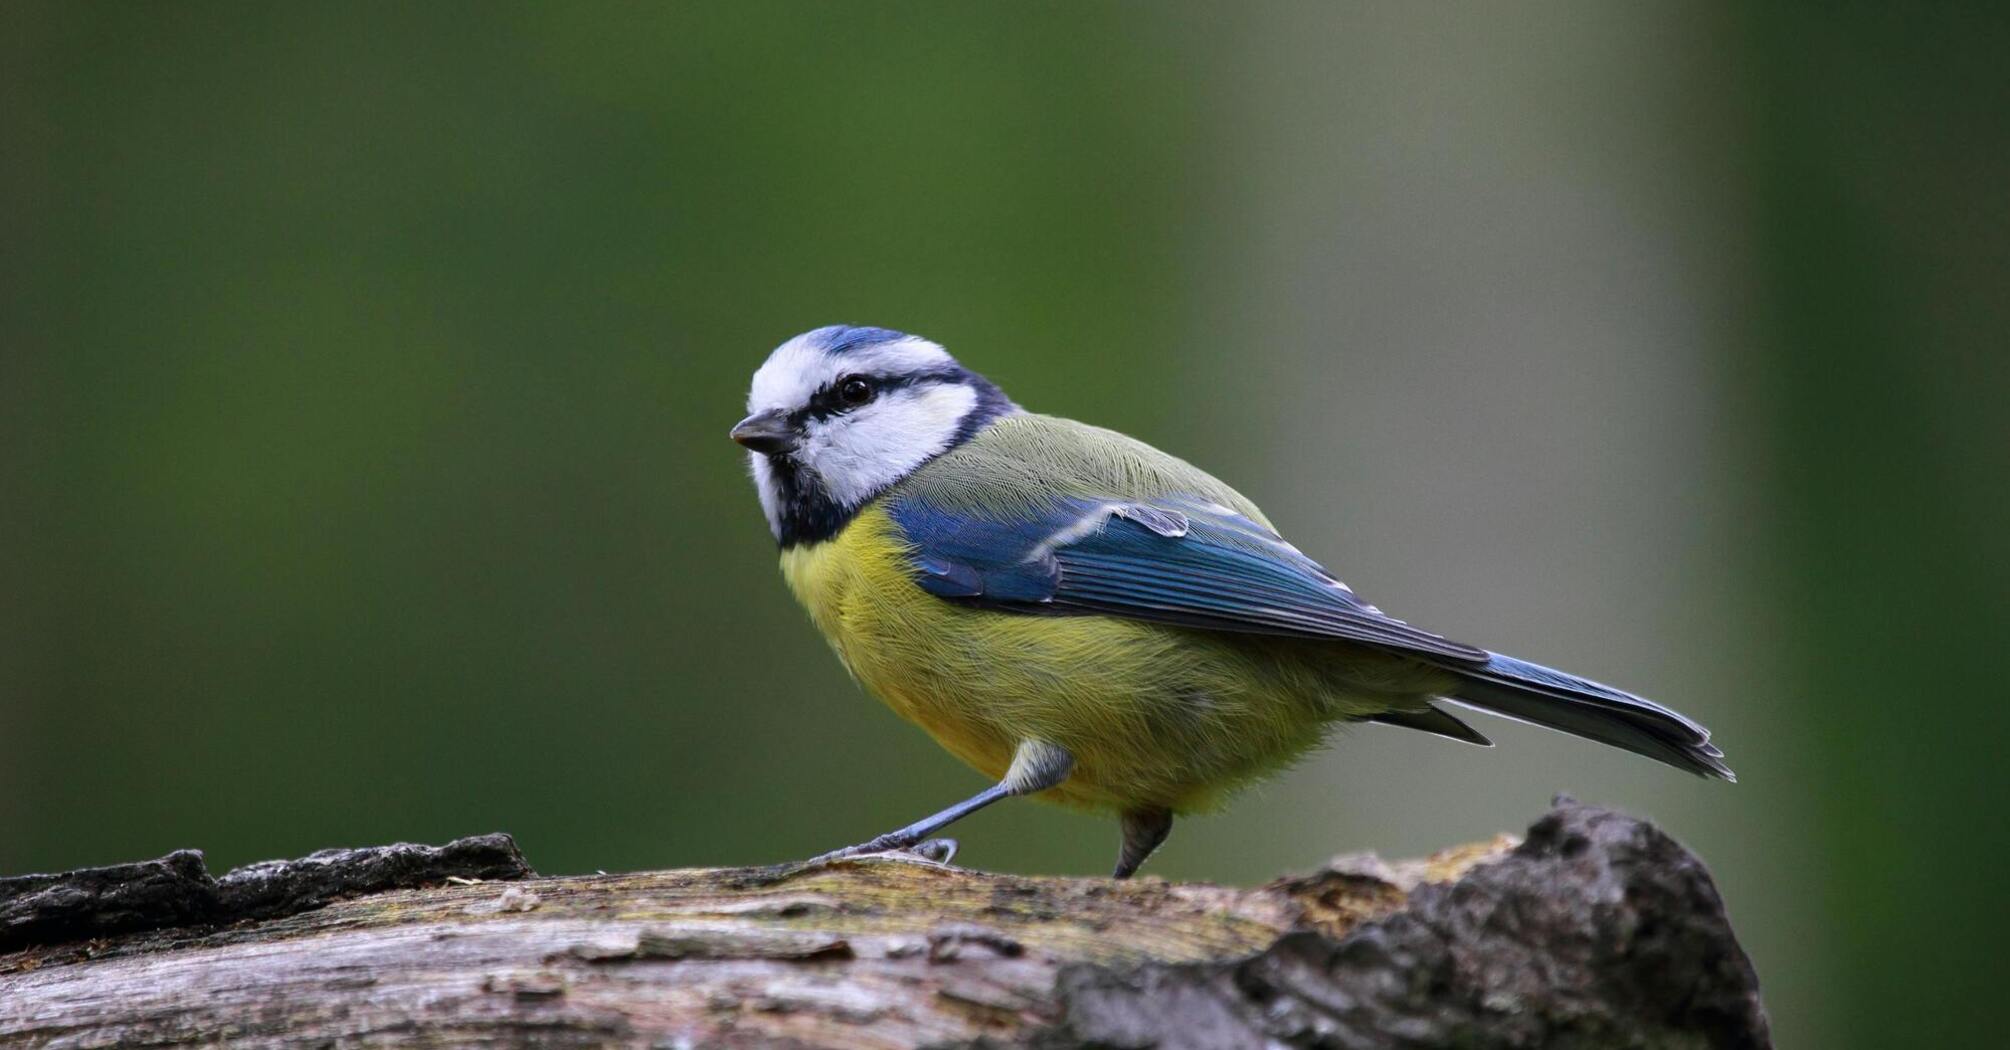 Why does a tit knock on the window